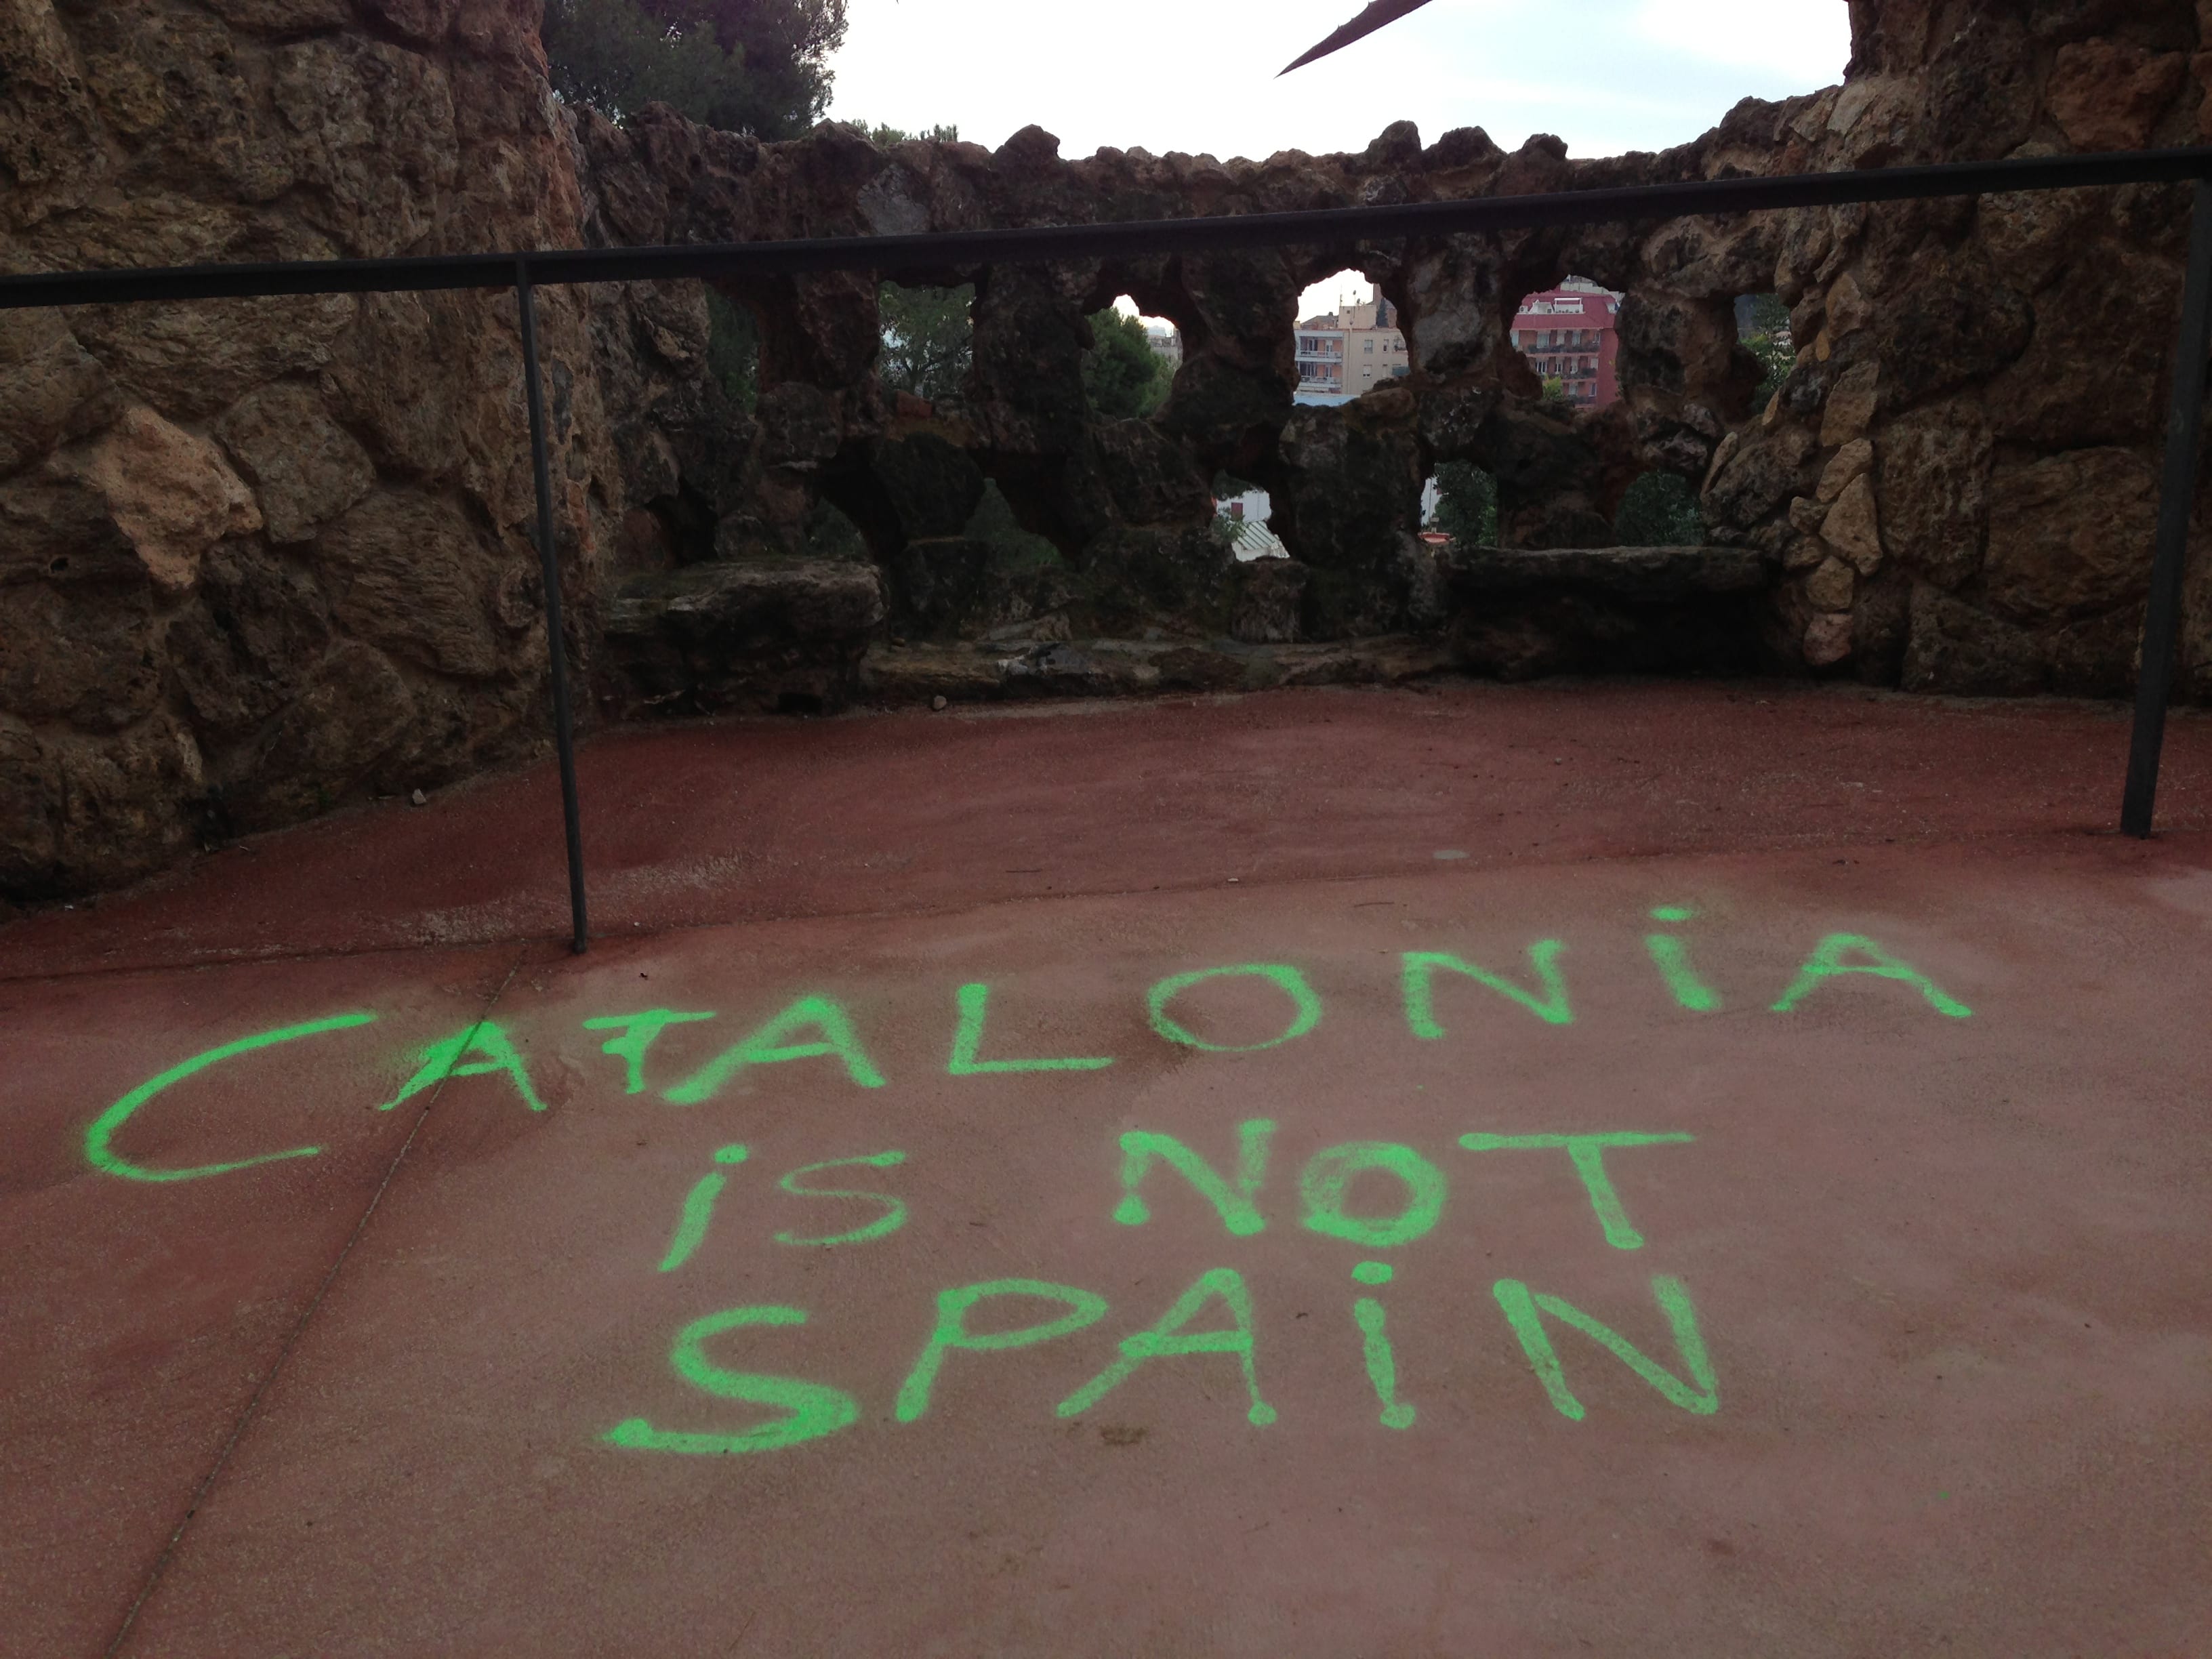 Pro-independence graffiti in Barcelona's famous Gaudi-designed Parc Guell